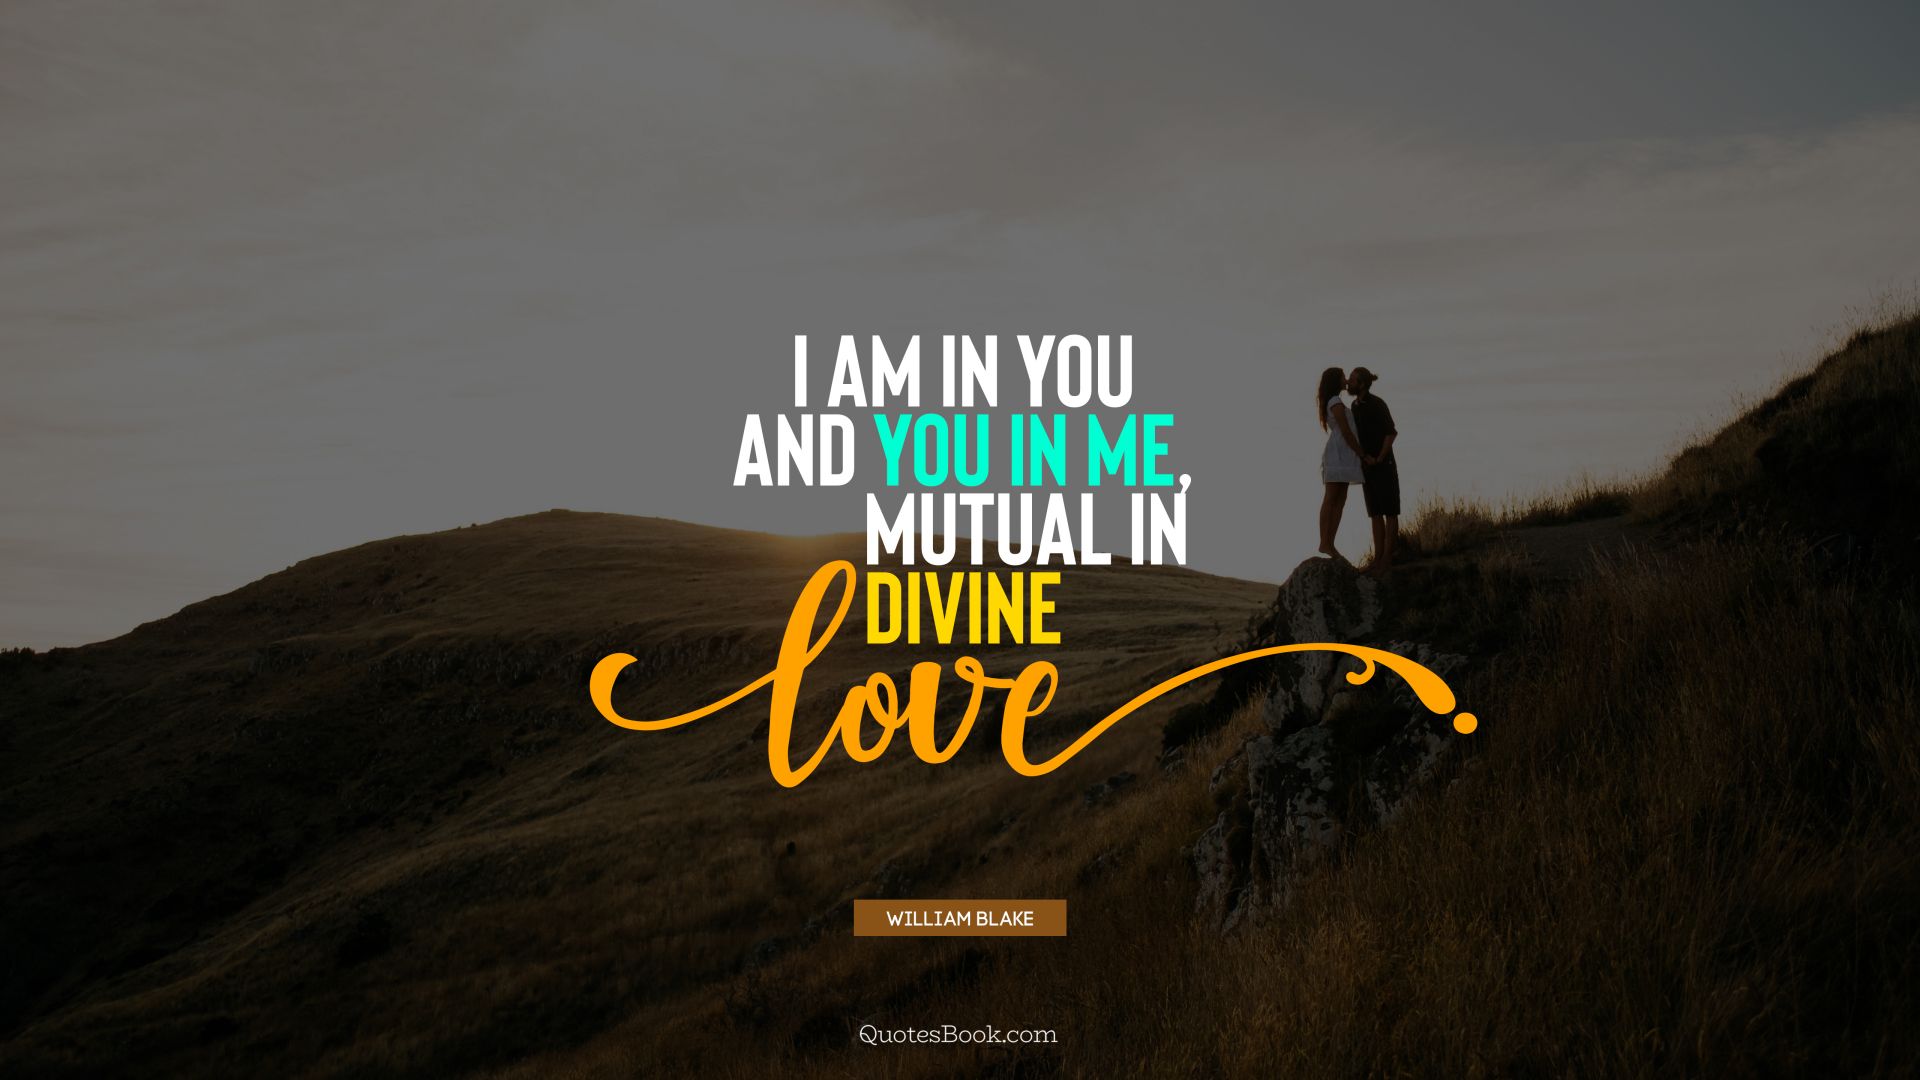 I am in you and you in me, mutual in divine love. - Quote by William Blake 